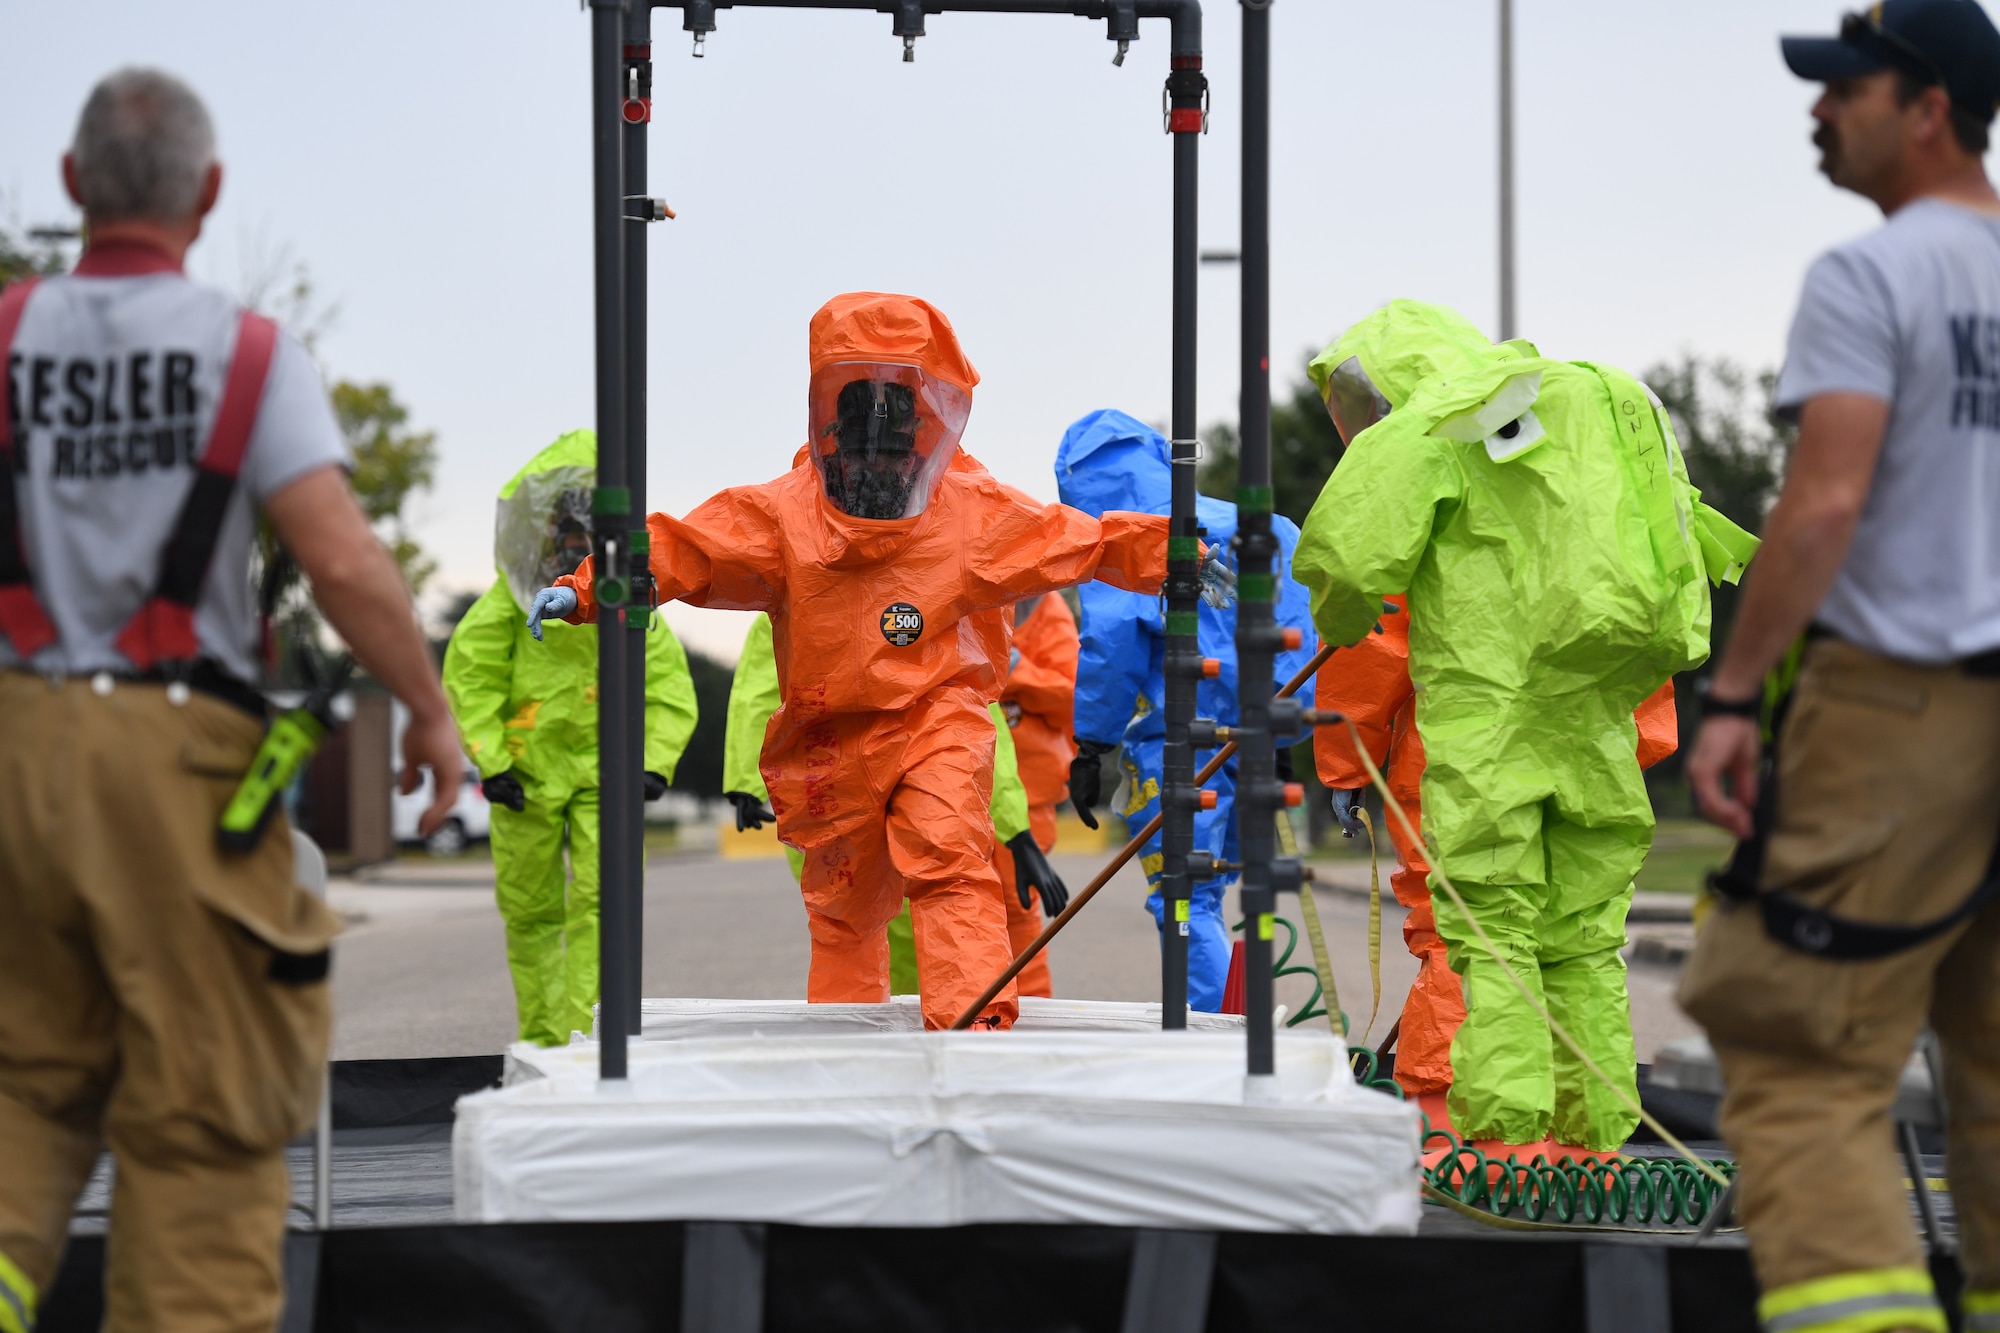 Members of the Keesler fire department, bioenvironmental and emergency management go through the decontamination site during the Anti-Terrorism, Force Protection Condition and Chemical, Biological, Radiological, Nuclear and high-yield Explosives training exercise near the Live Oak Dining Facility at Keesler Air Force Base, Mississippi, Oct. 24, 2019. The exercise scenario simulated a gym bag with ricin found by Keesler personnel who alerted first responders. The exercise was conducted to evaluate the mission readiness and security of Keesler. (U.S. Air Force photo by Kemberly Groue)